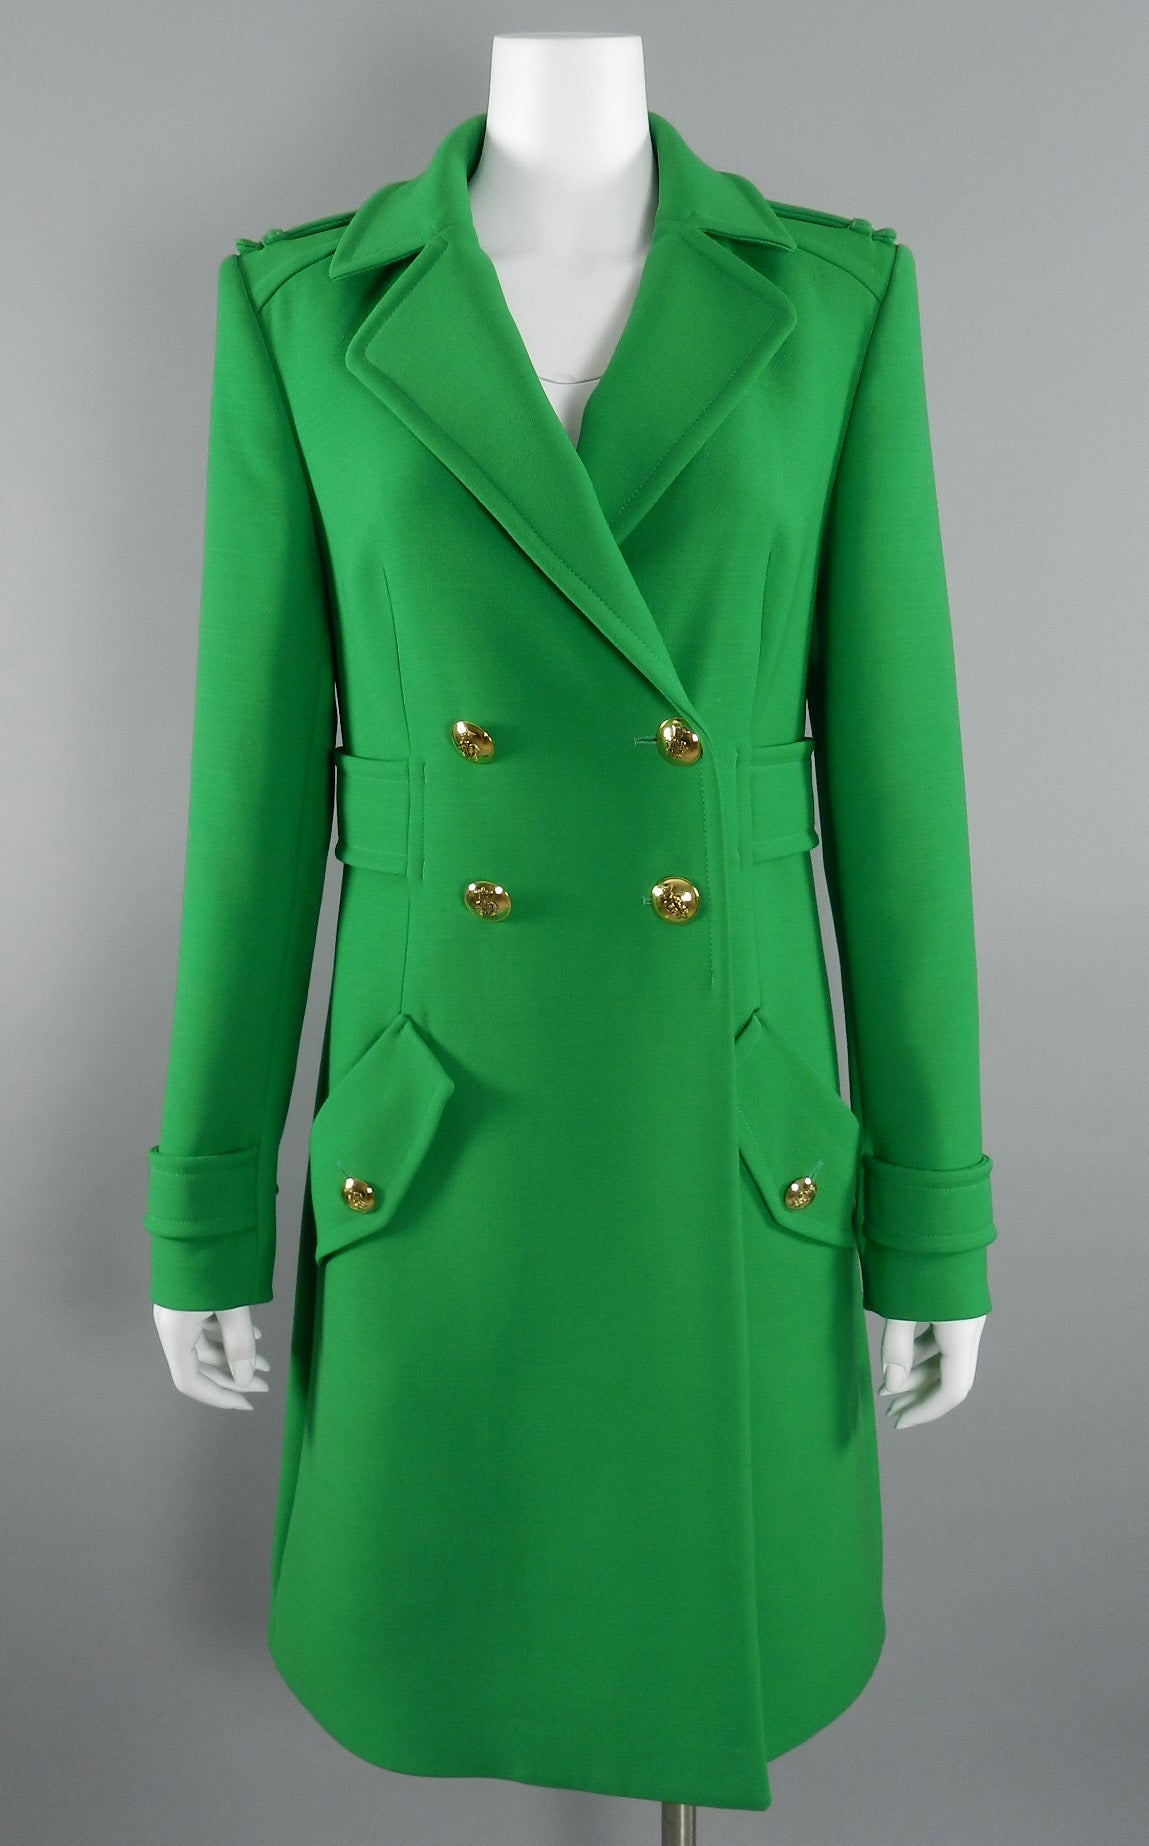 Emilio Pucci Green Wool Coat with Gold Buttons 3